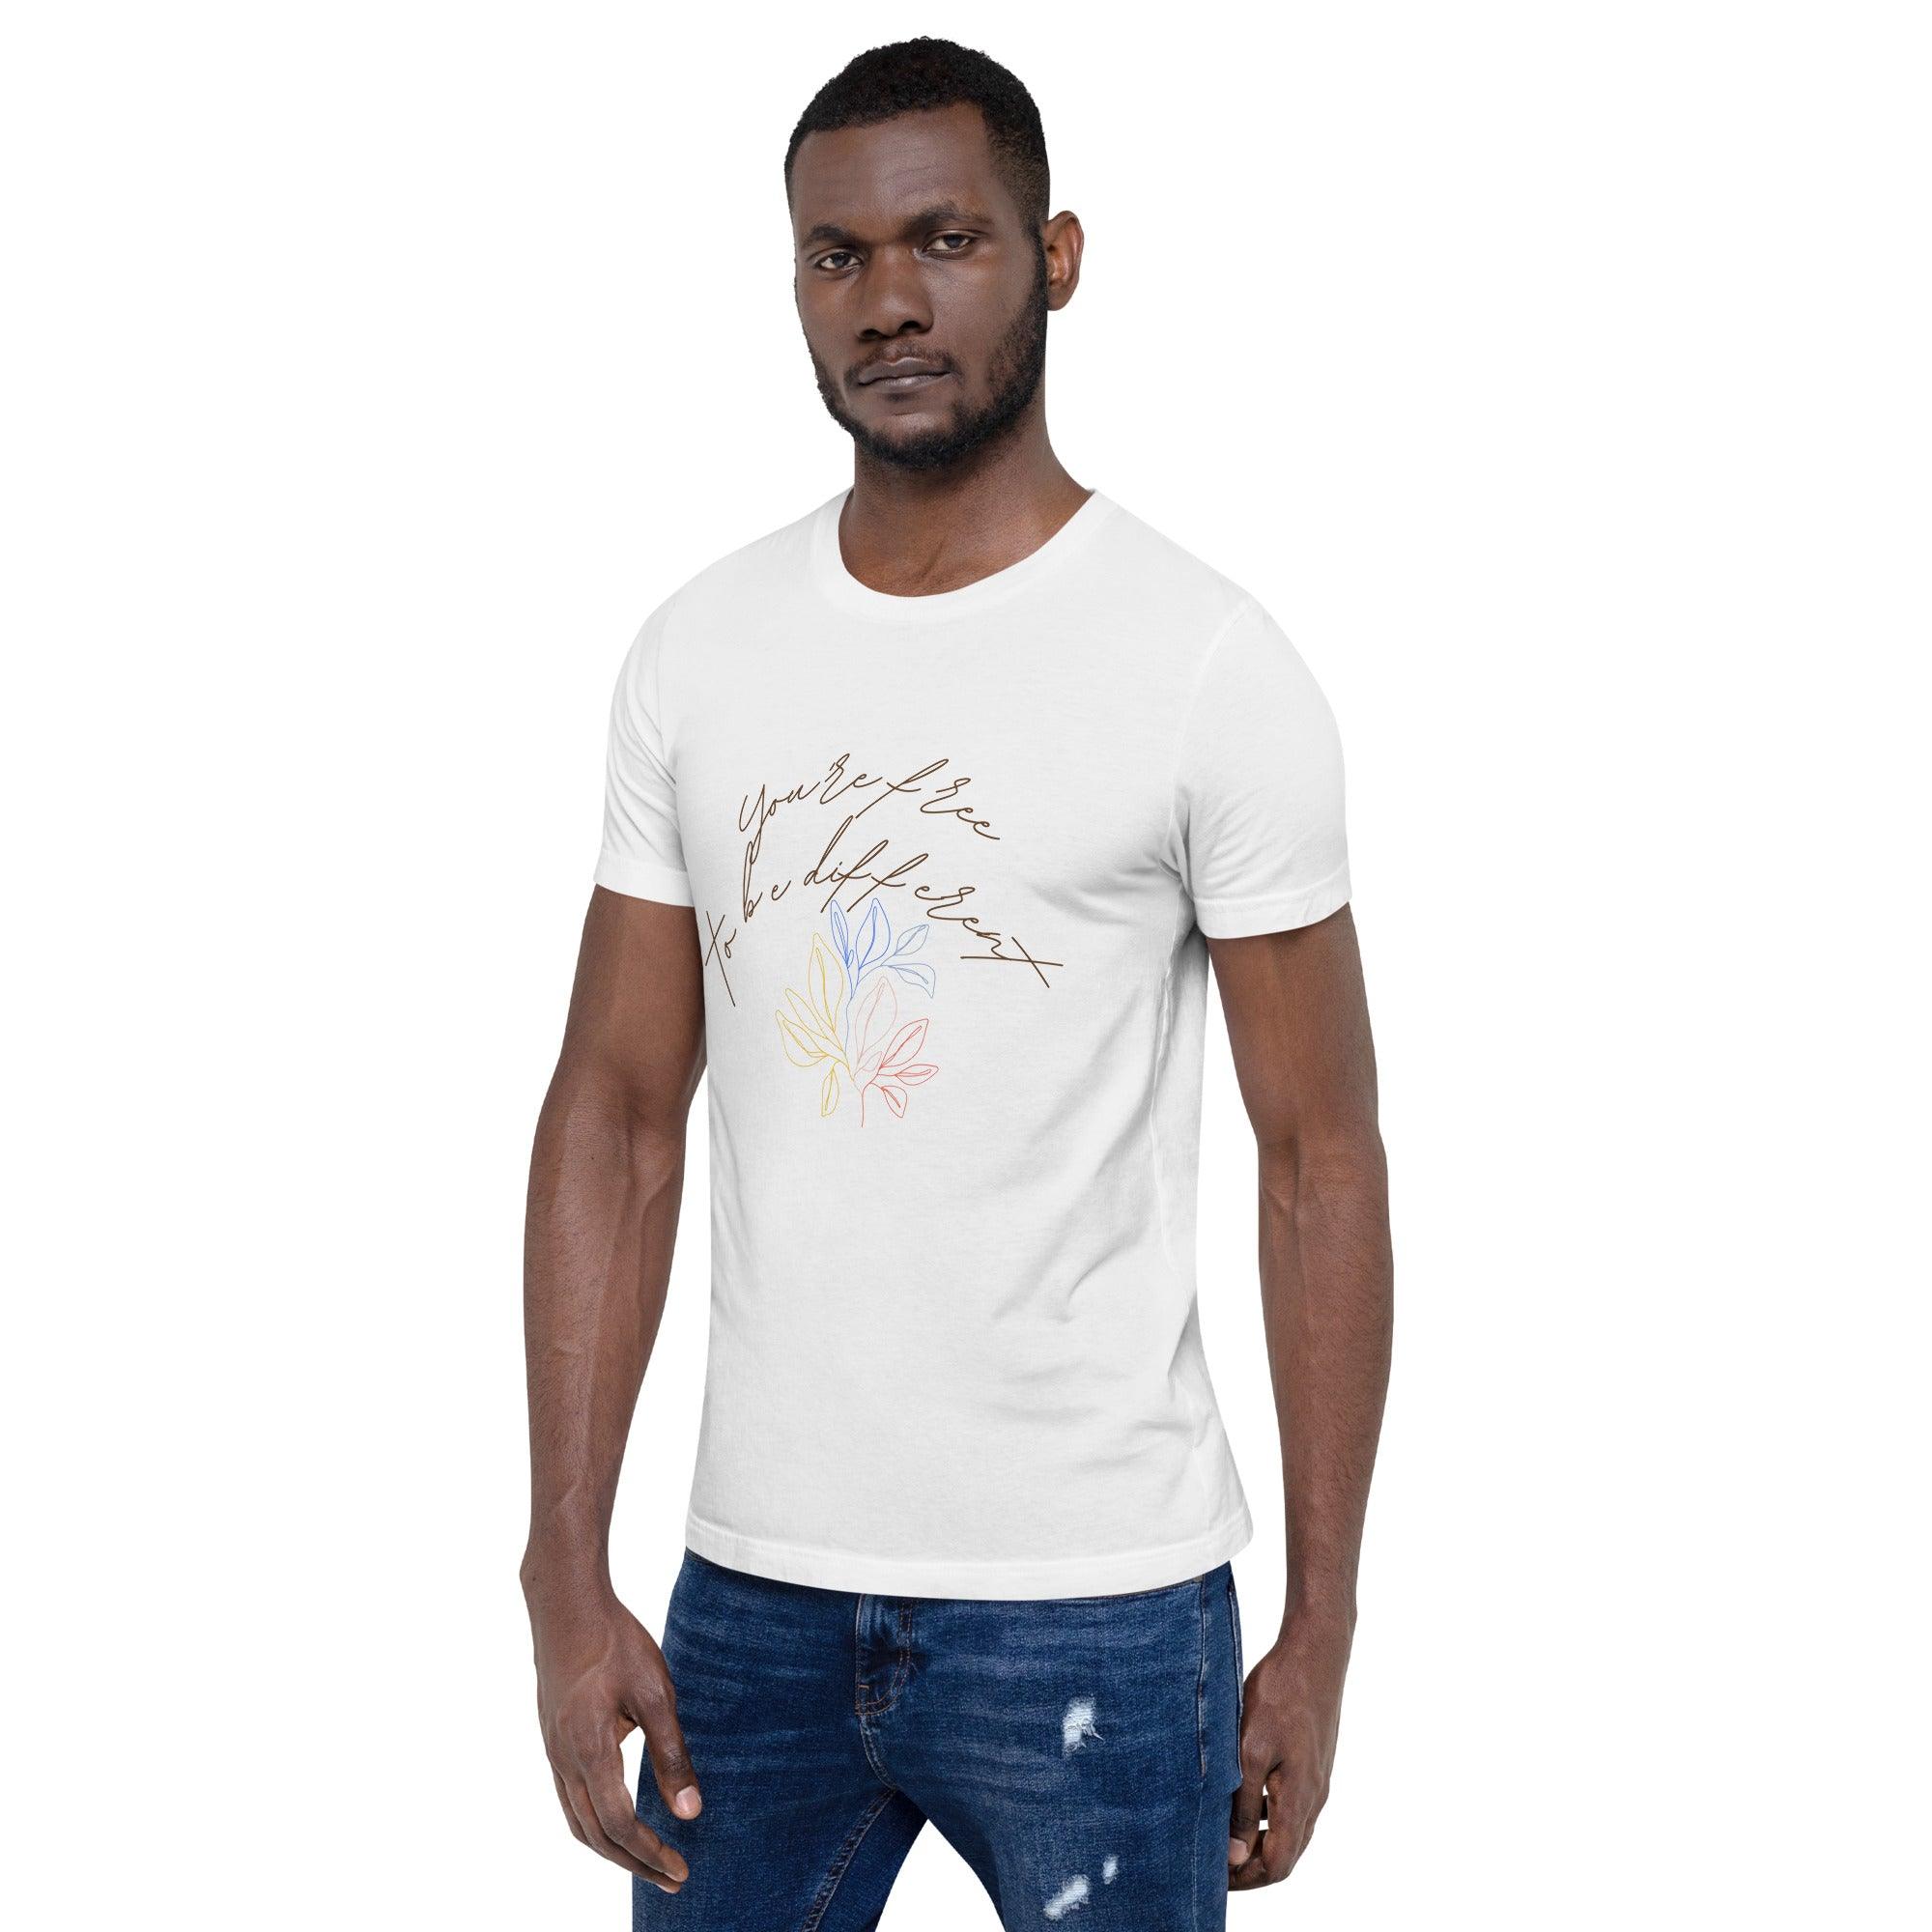 You Are Free To Be Different, Premium Short-Sleeve Unisex T-Shirt | Positive Affirmation Tee - Affirm Effect